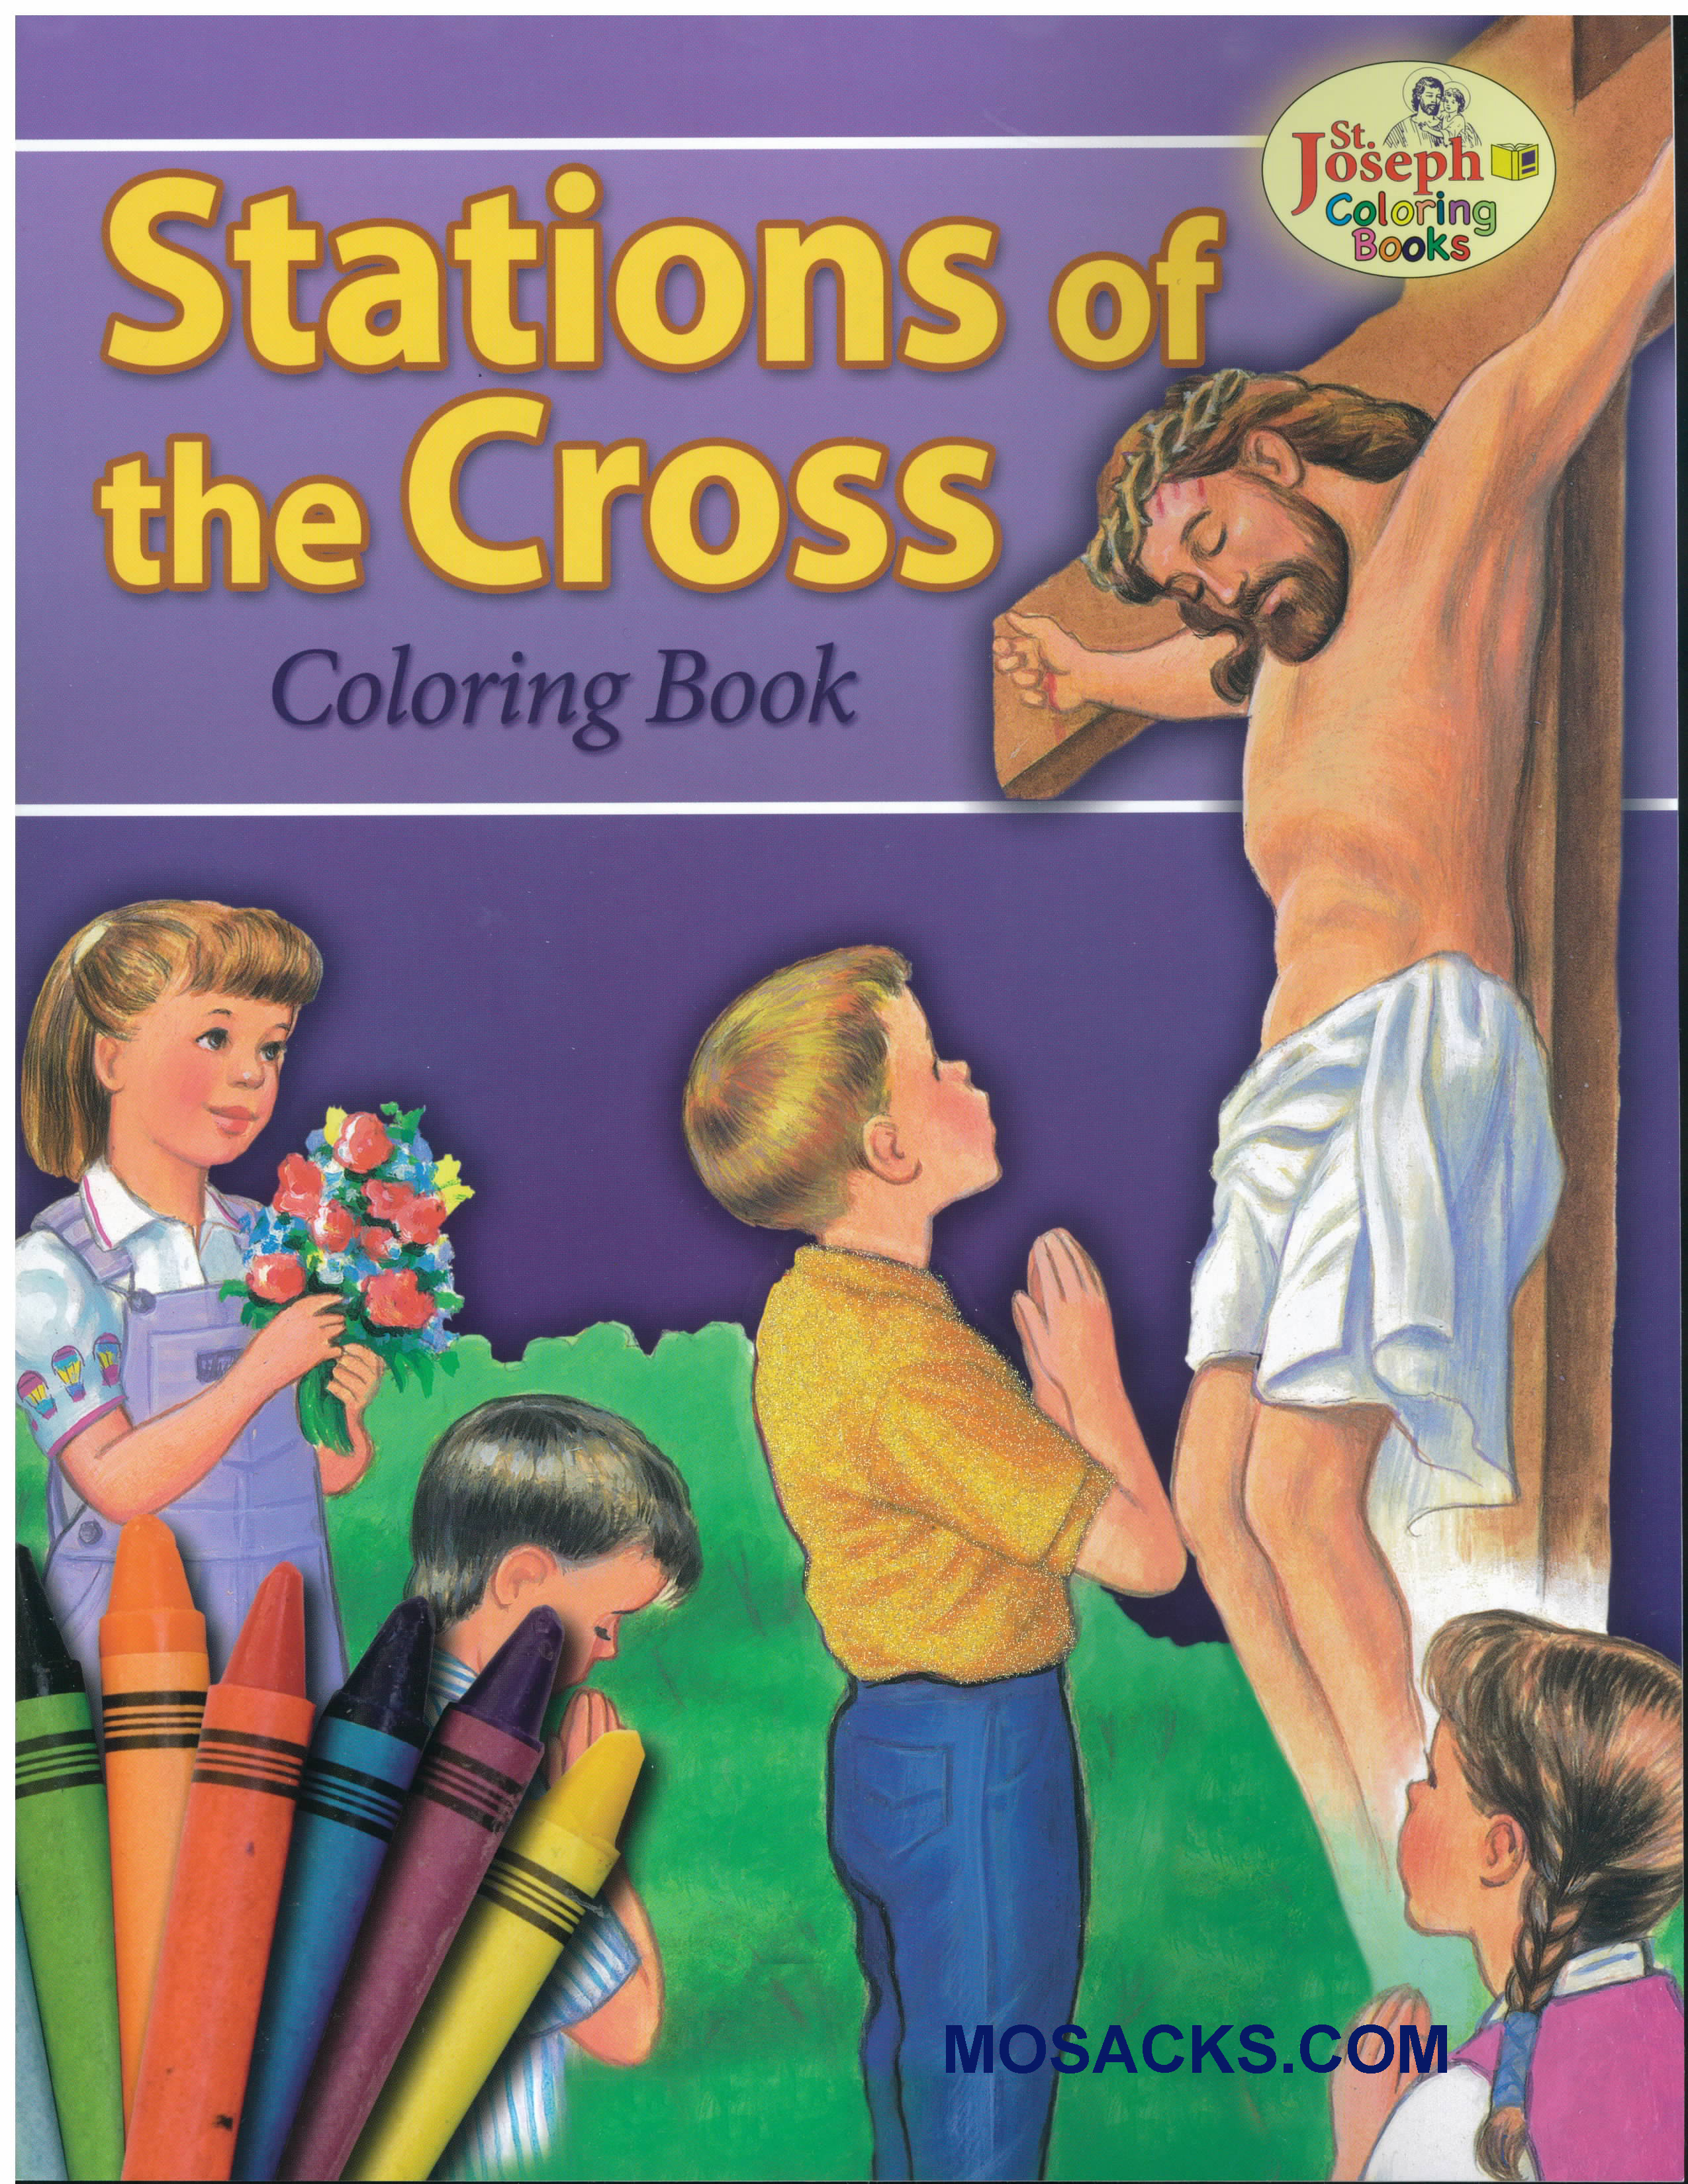 St Joseph Educational Coloring Book Stations Of The Cross-978089942689-1